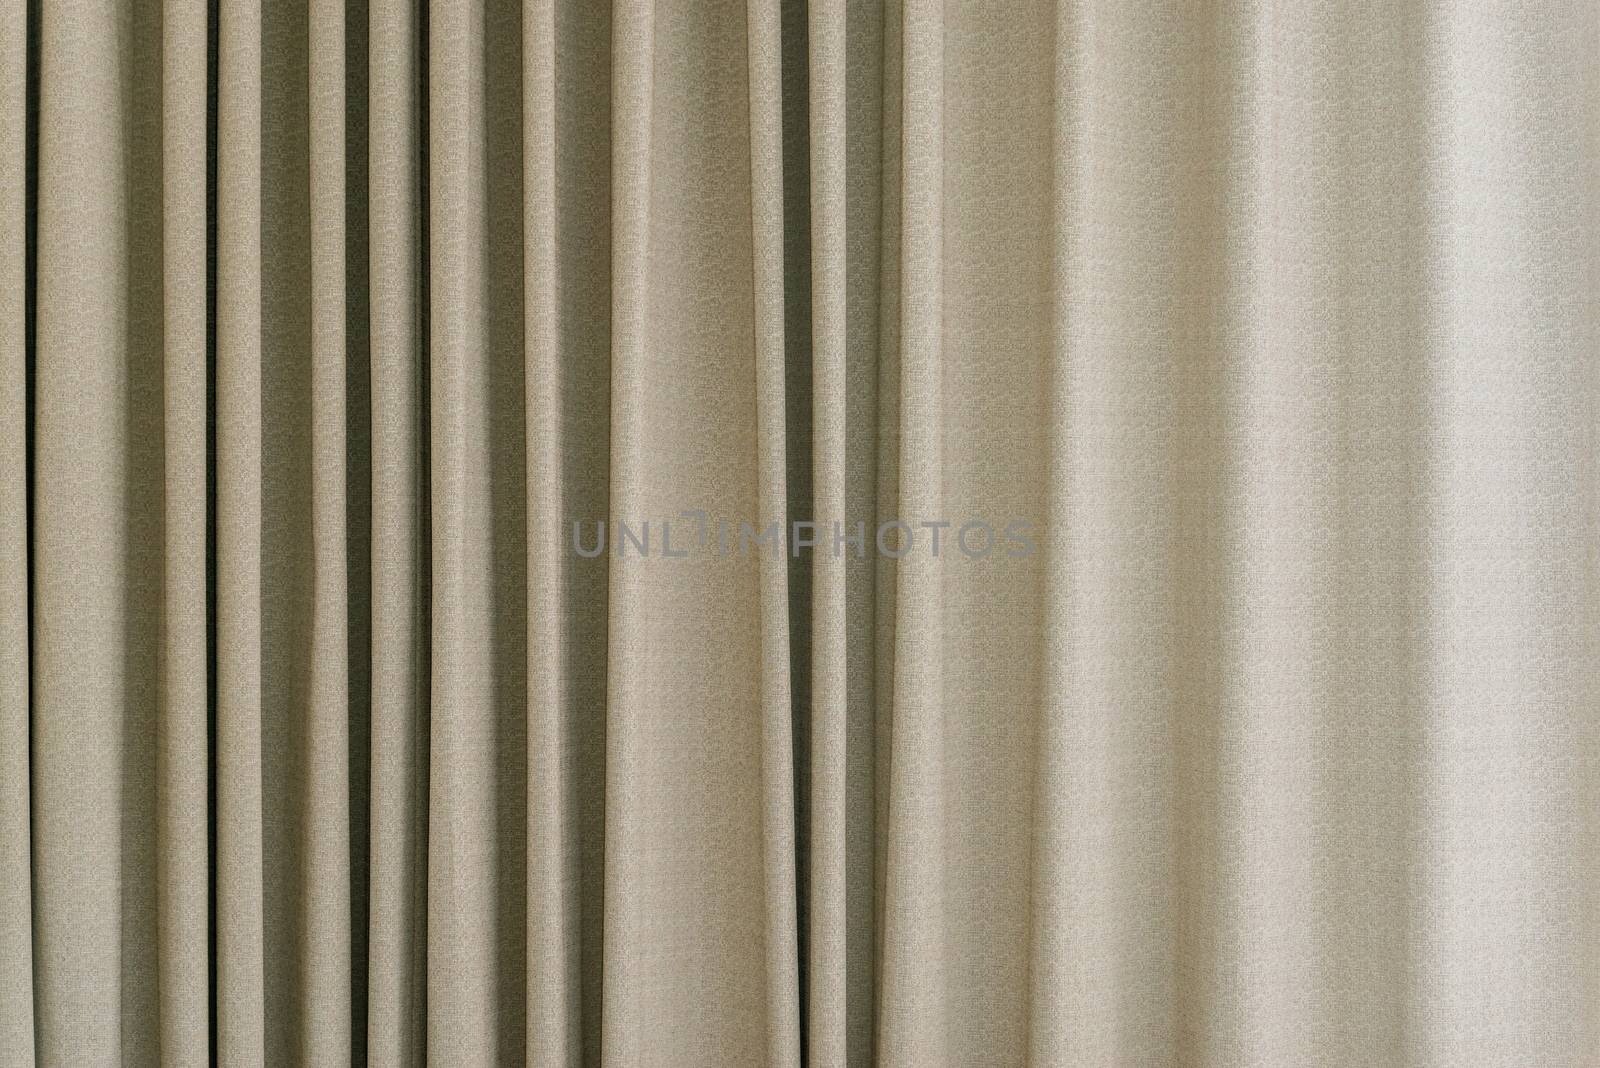 cream and brown curtain pattern from window